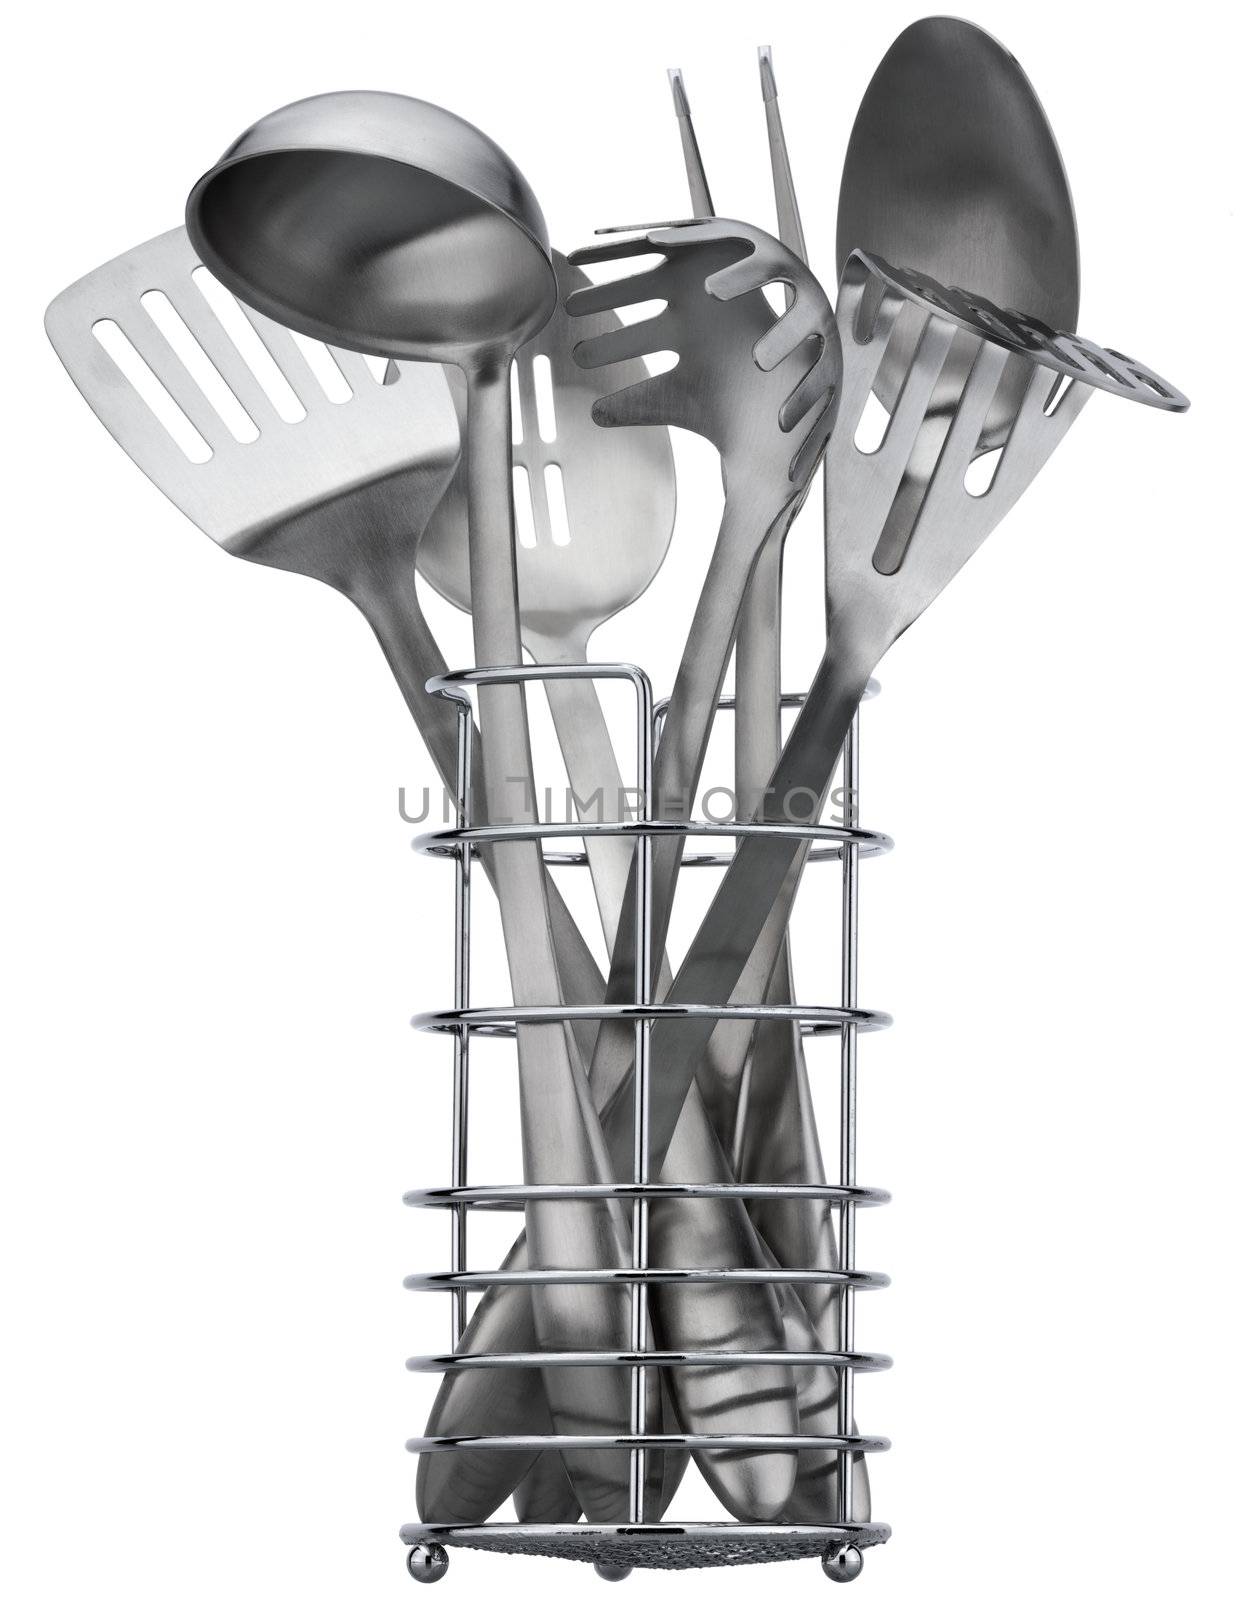 A set of chrome-plated kitchen utensils in a metallic glass